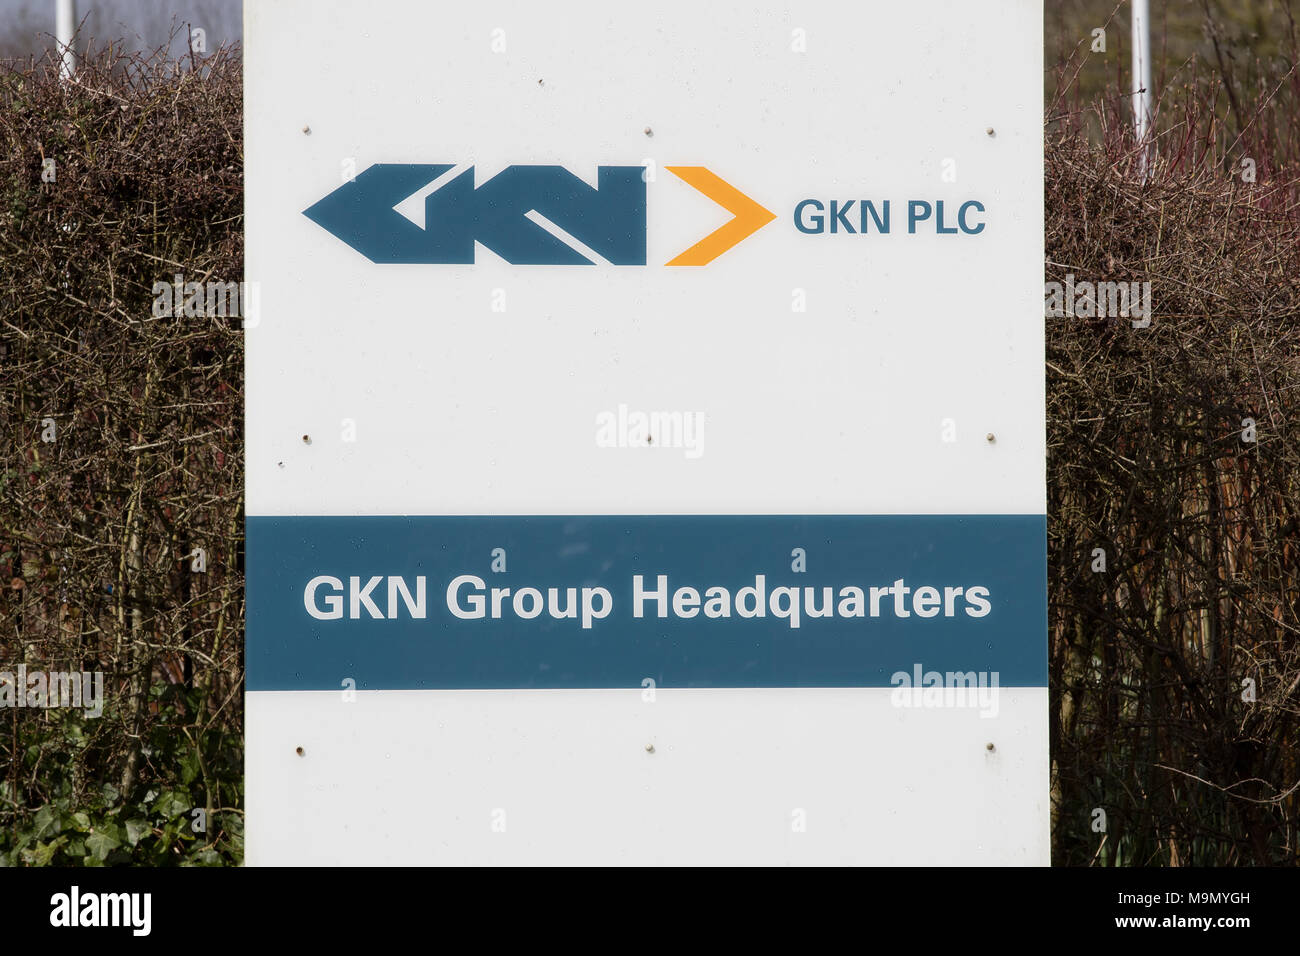 The Headquarters of GKN, a British multinational automotive and aerospace components company, in Redditch, Worcestershire as Business Secretary Greg Clark has demanded 'extensive and clear' commitments from turnaround specialist Melrose over its £8.1 billion bid for UK engineering giant GKN, raising concerns over short-term interests. Stock Photo